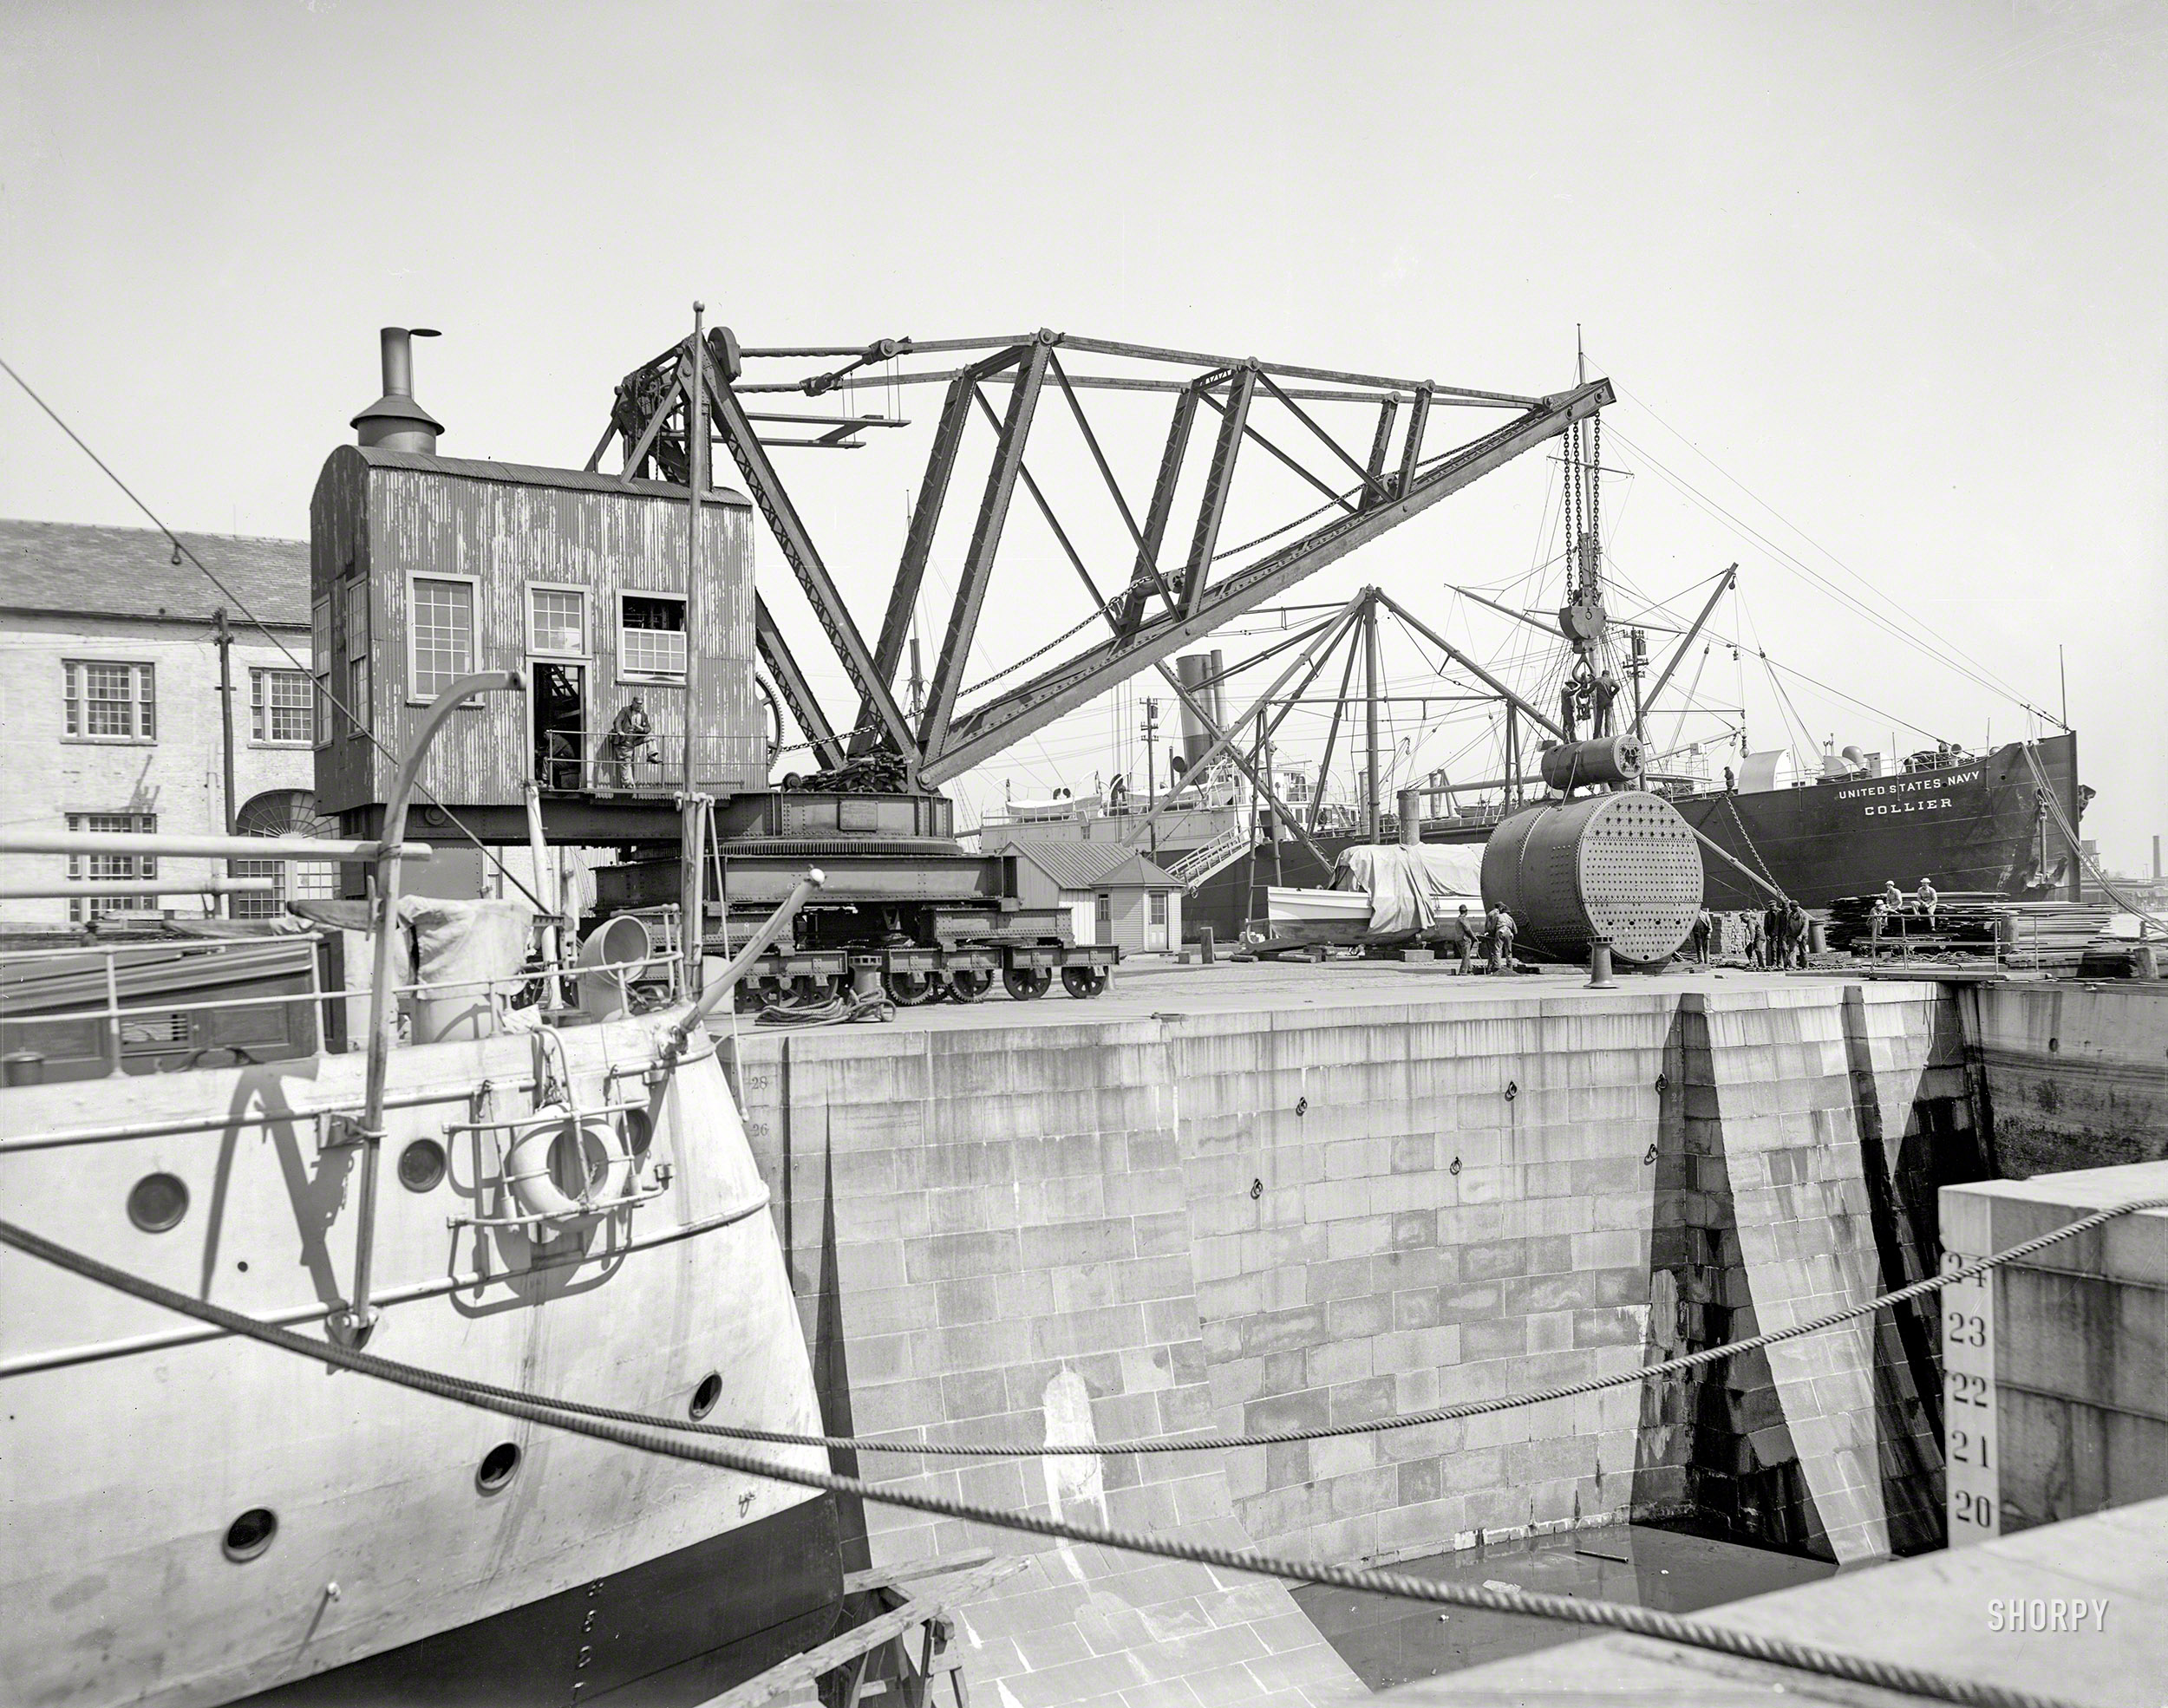 Virginia circa 1905. "The Great Crane, Norfolk Navy Yard." 8x10 inch dry plate glass negative, Detroit Publishing Company. View full size.